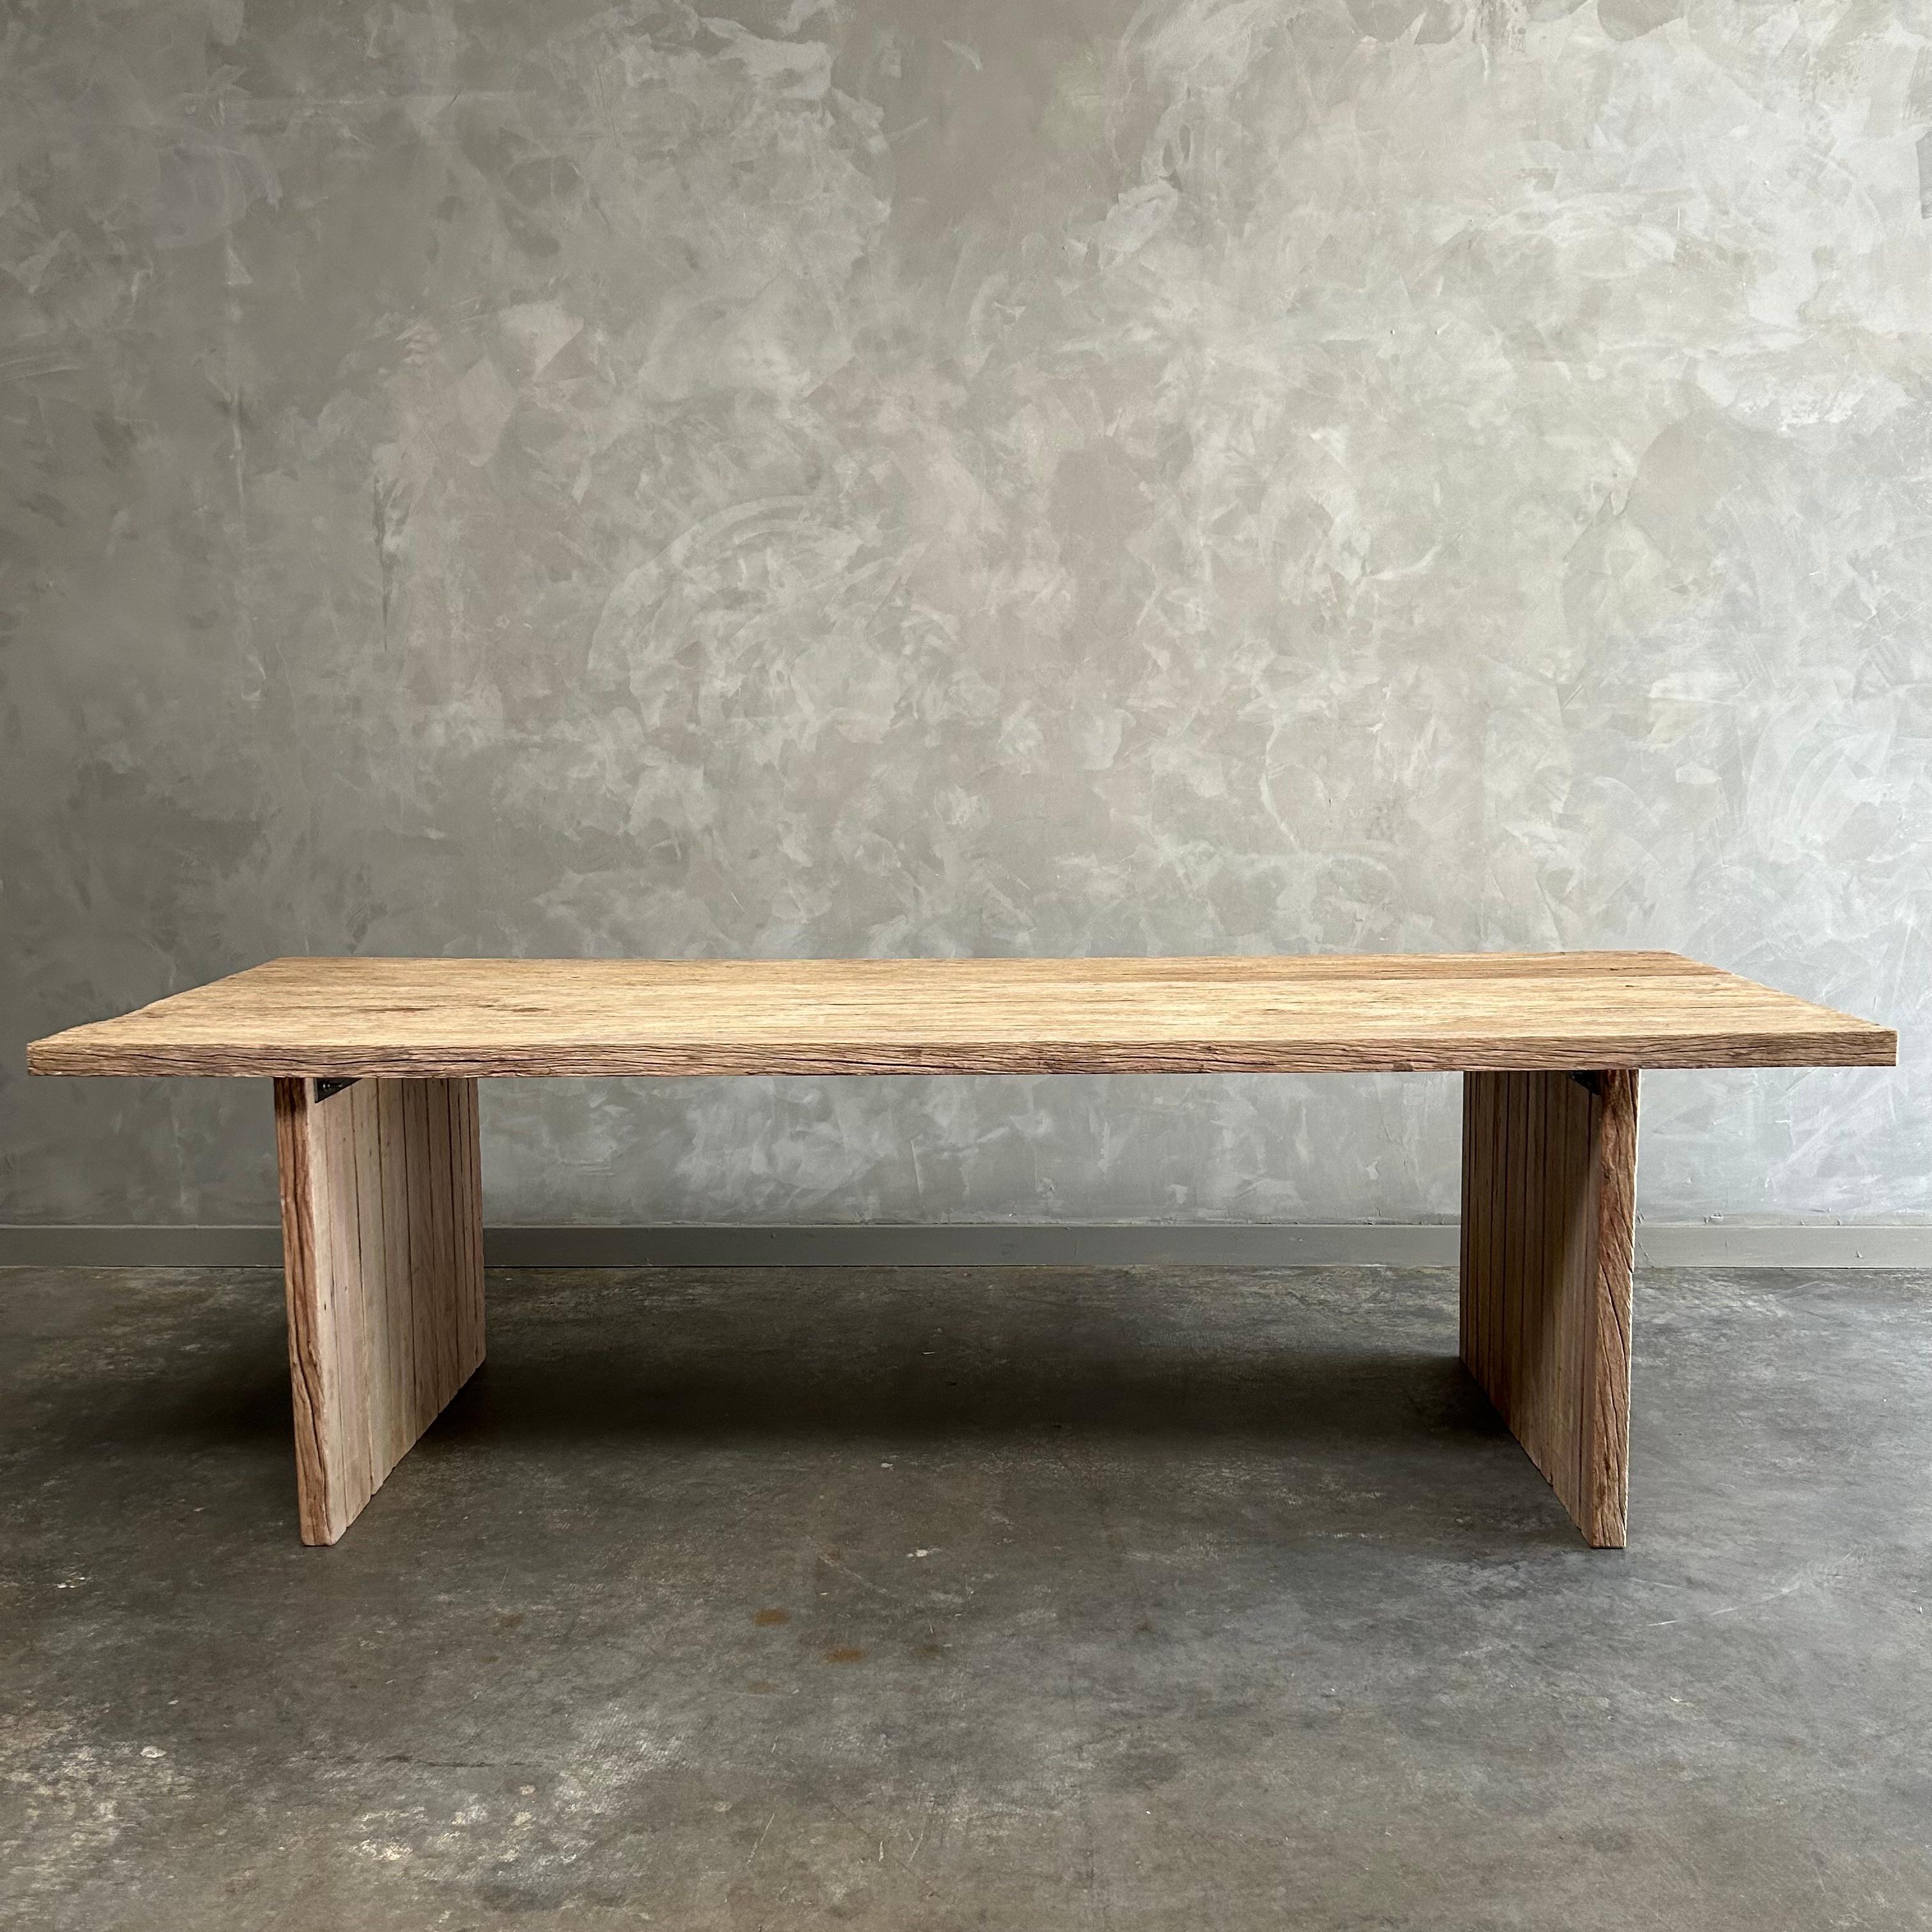 Elm dining table 
Size: 102